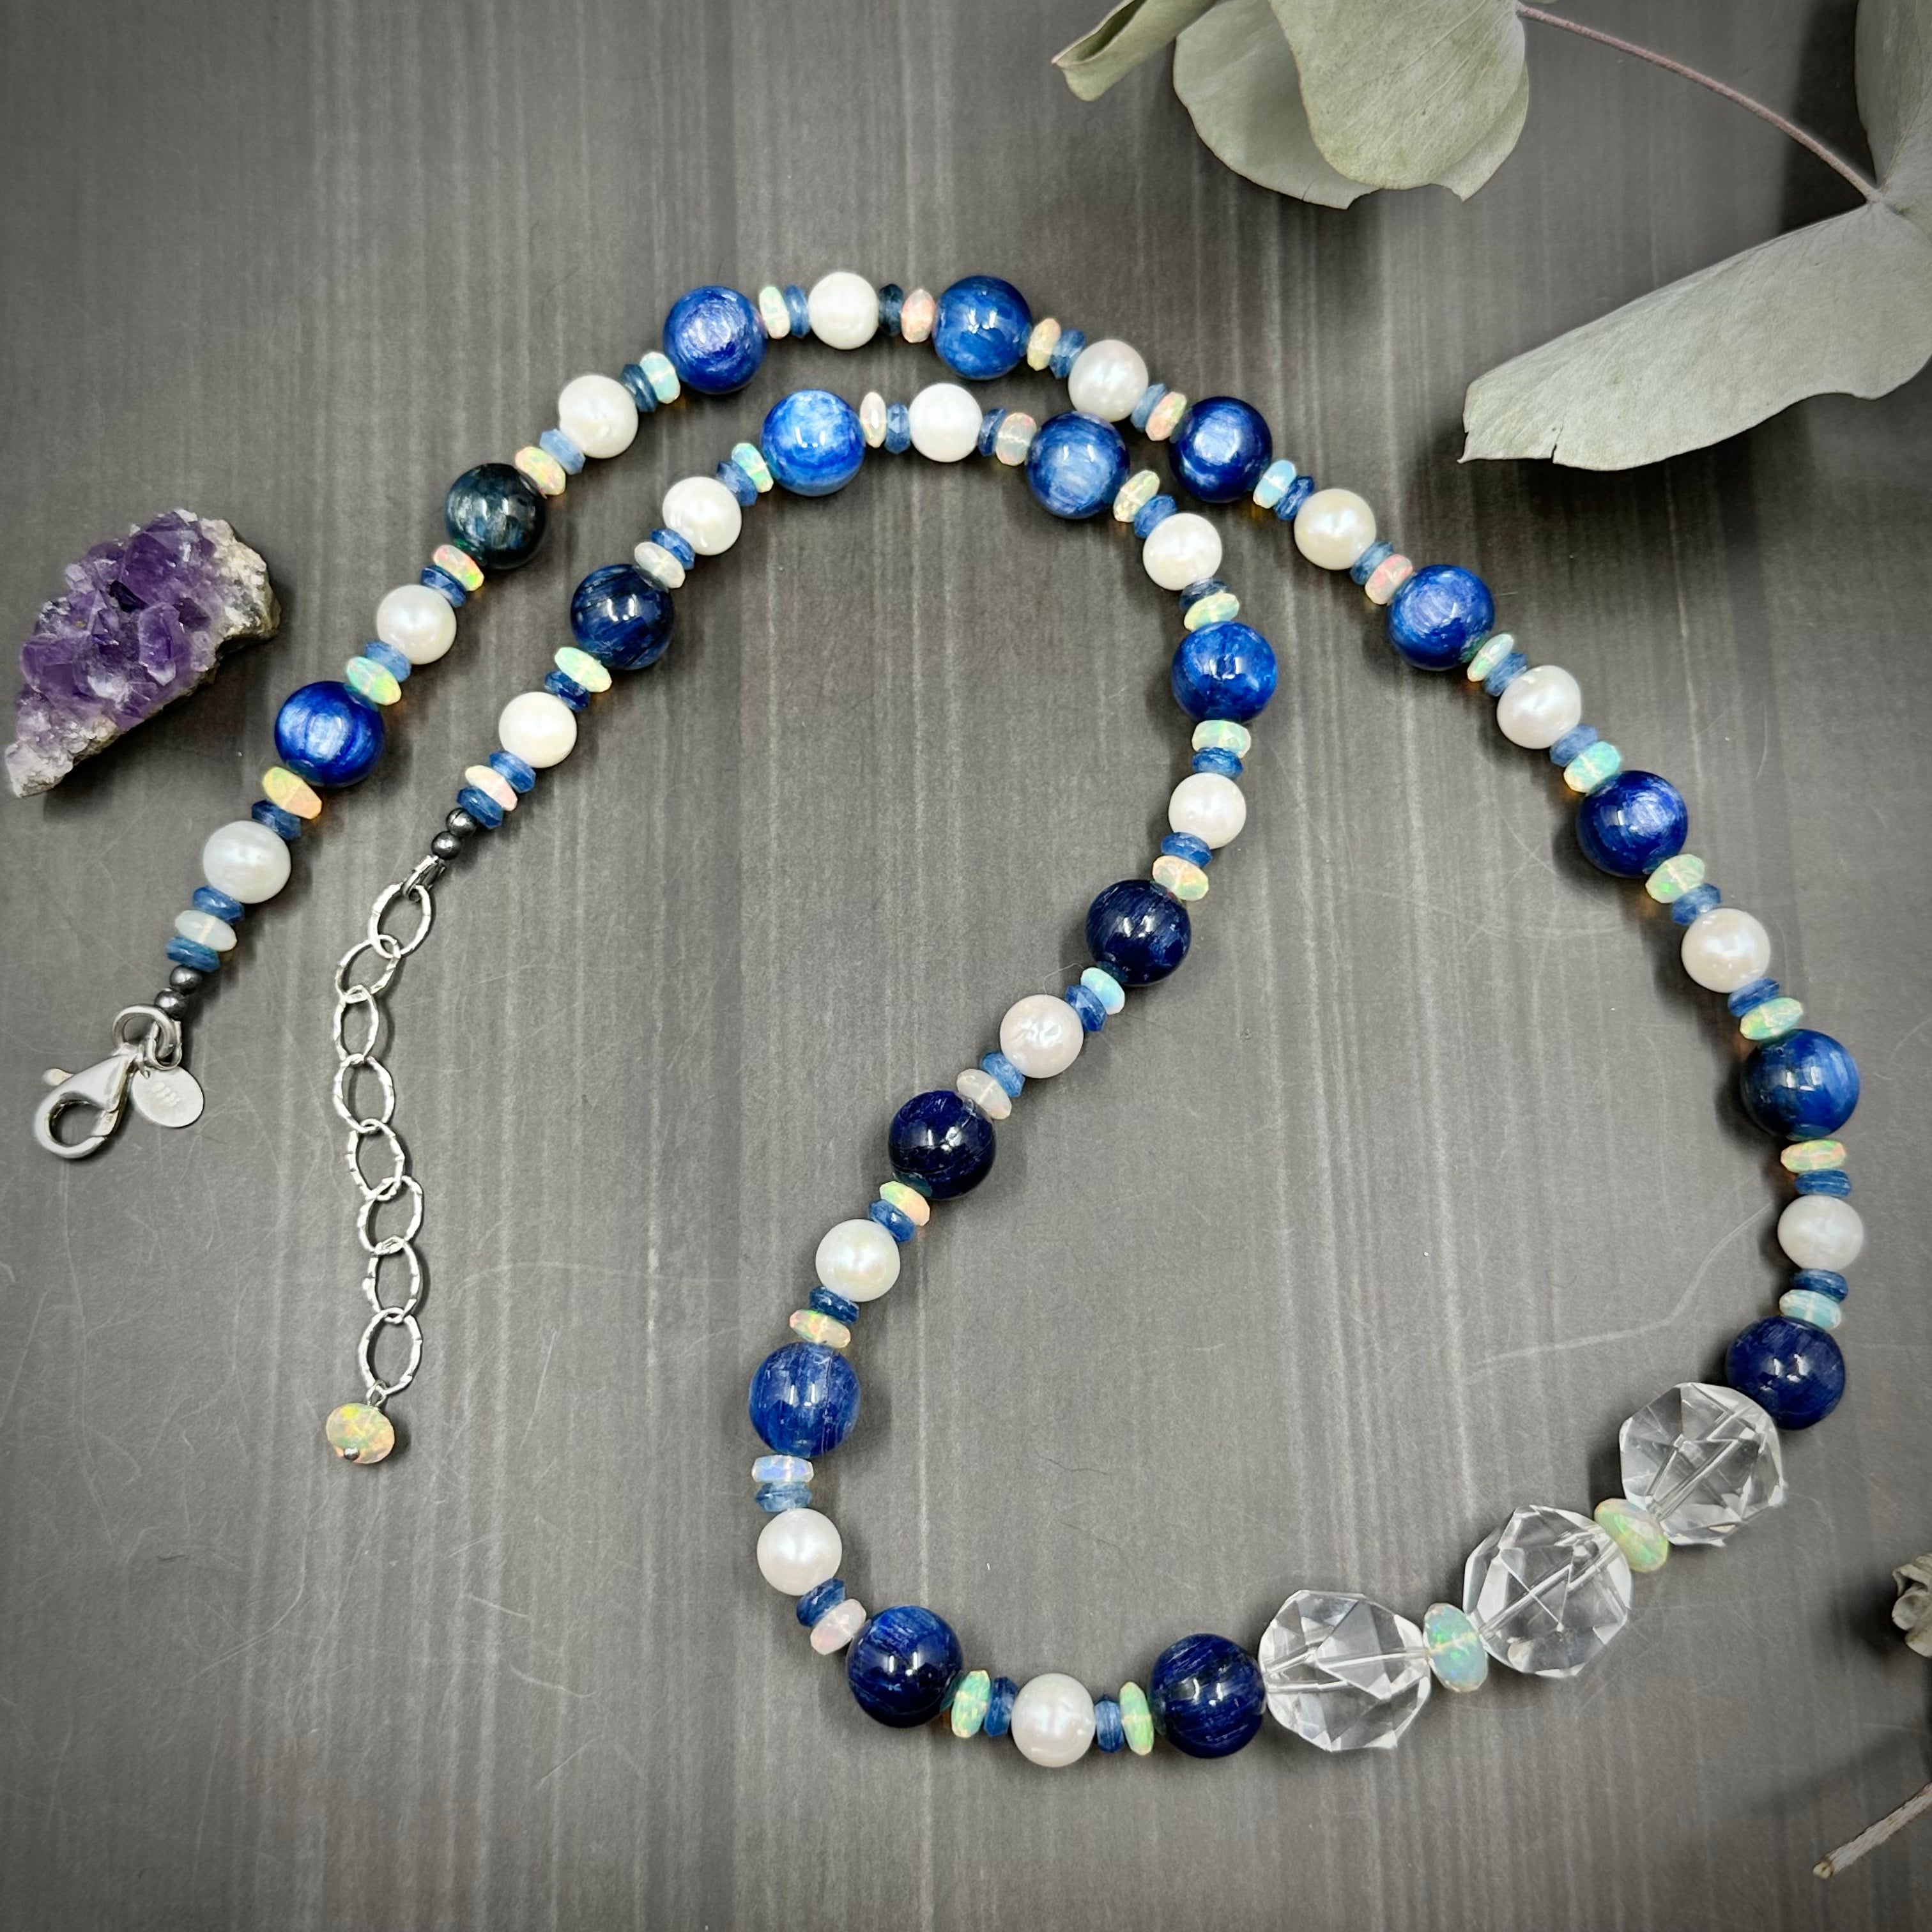 Luxurious AAA Kyanite, Ethiopian Faceted Opals, and Pearls necklace